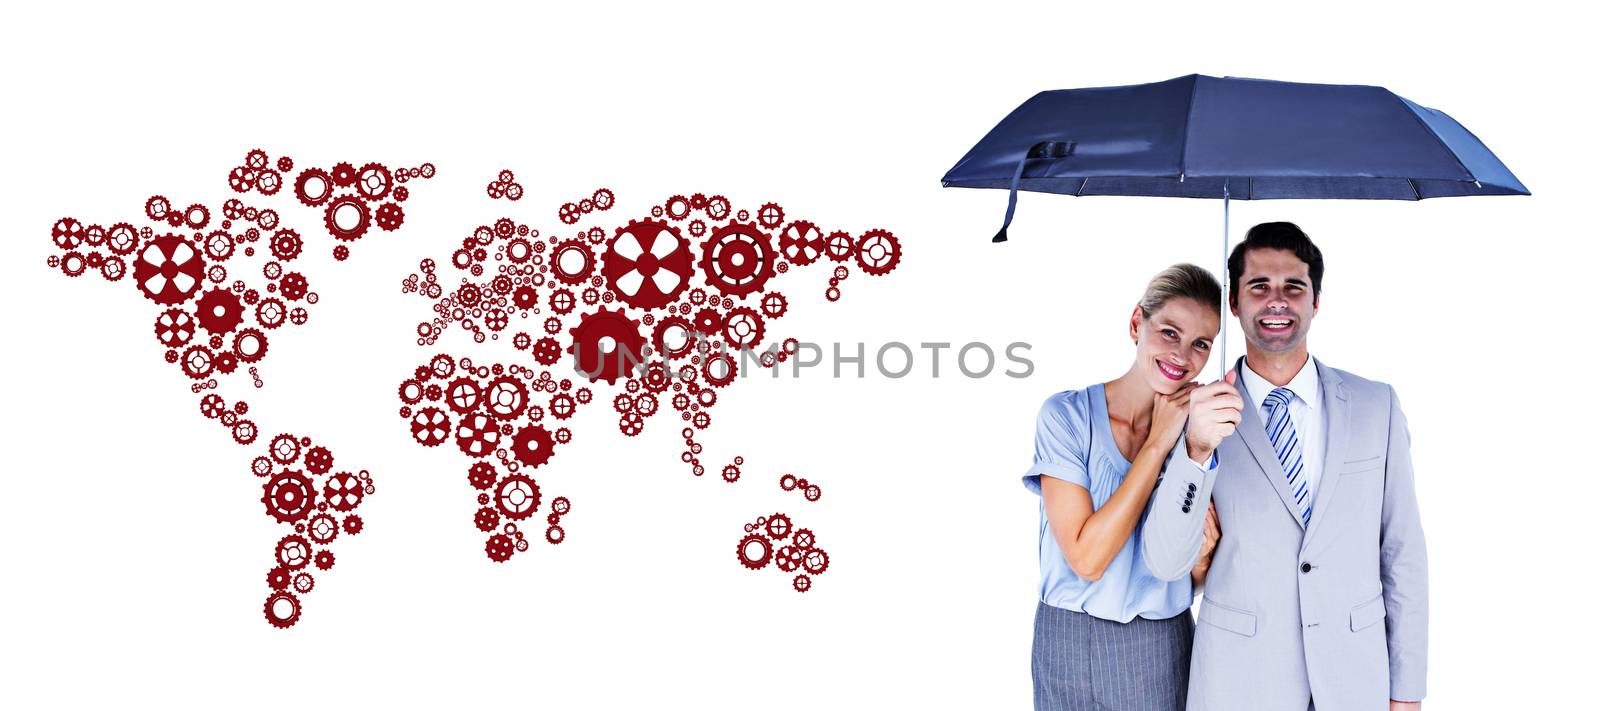 Business people holding a black umbrella against map made of cogs